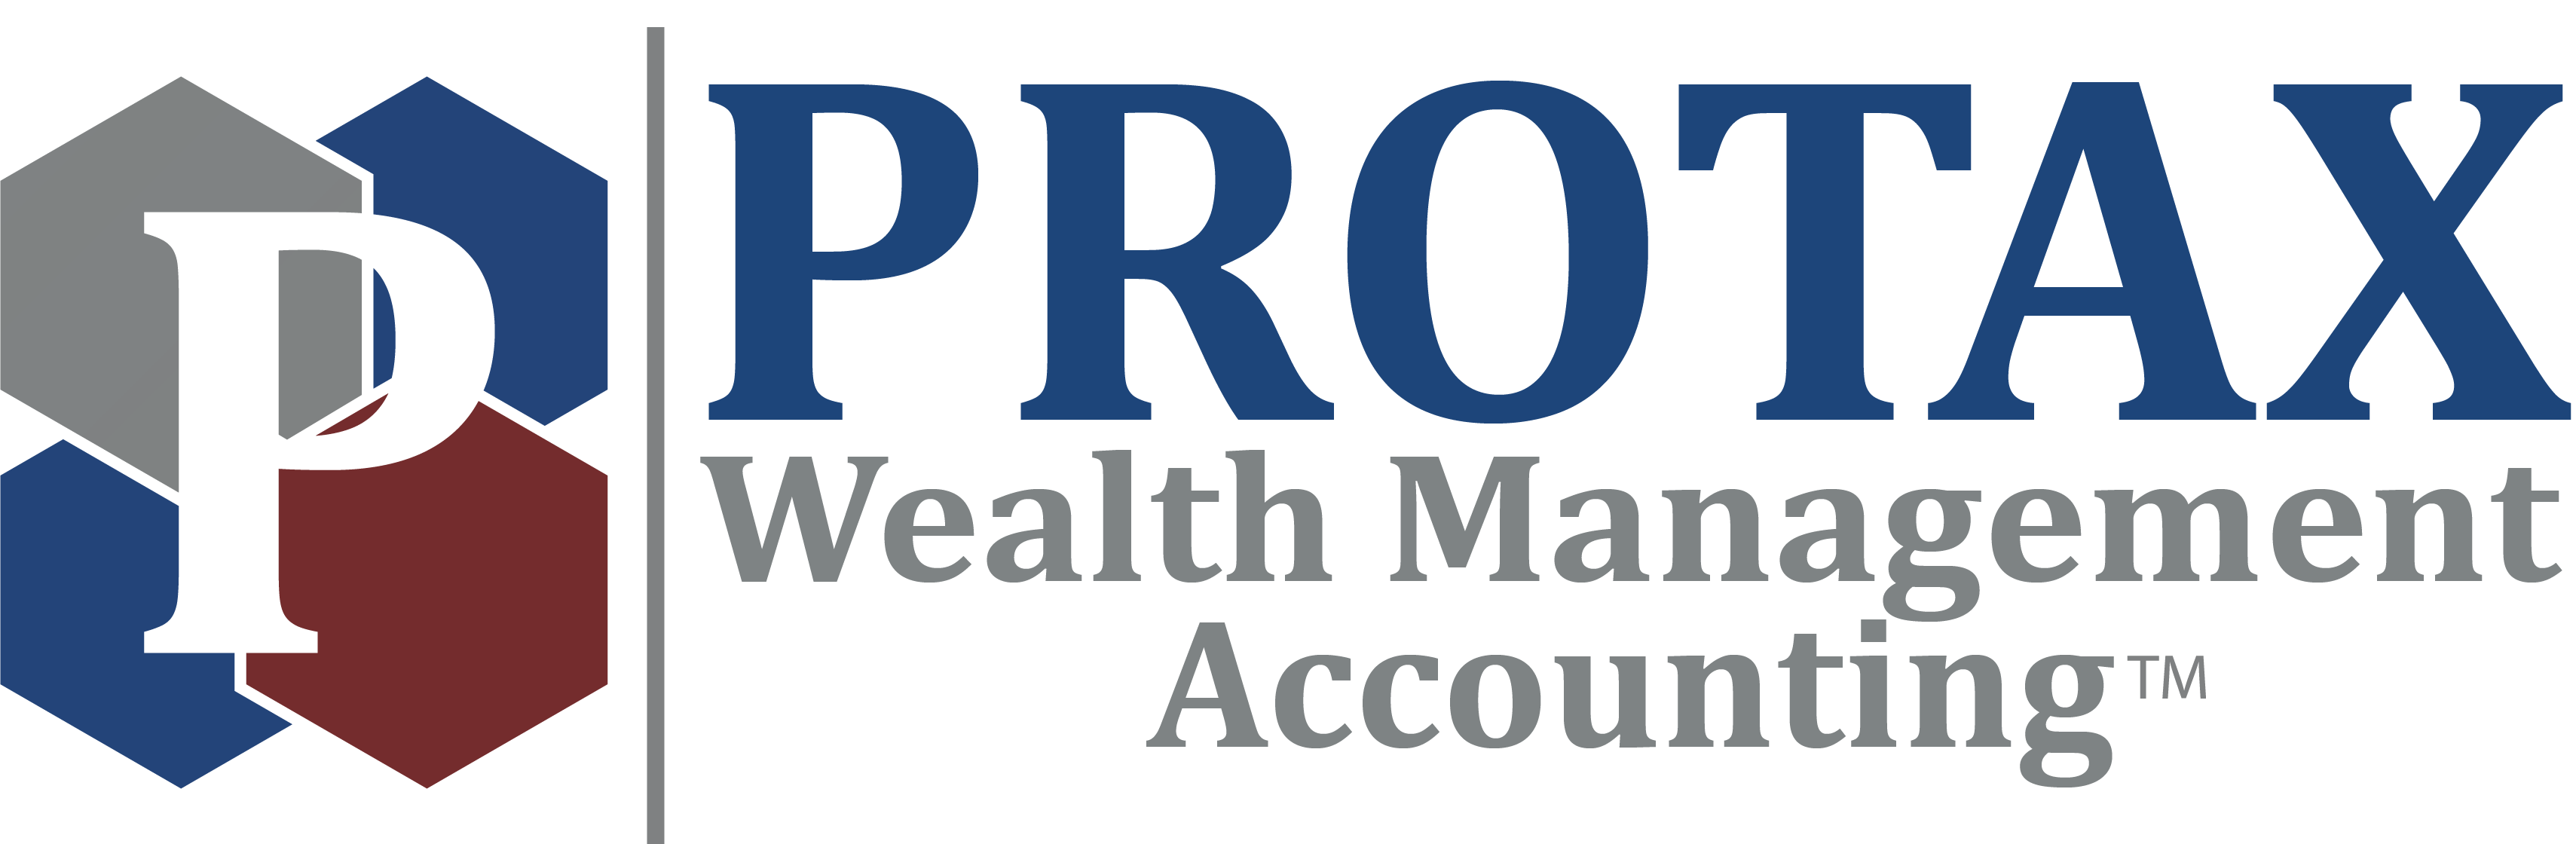 Protax wealth management accounting